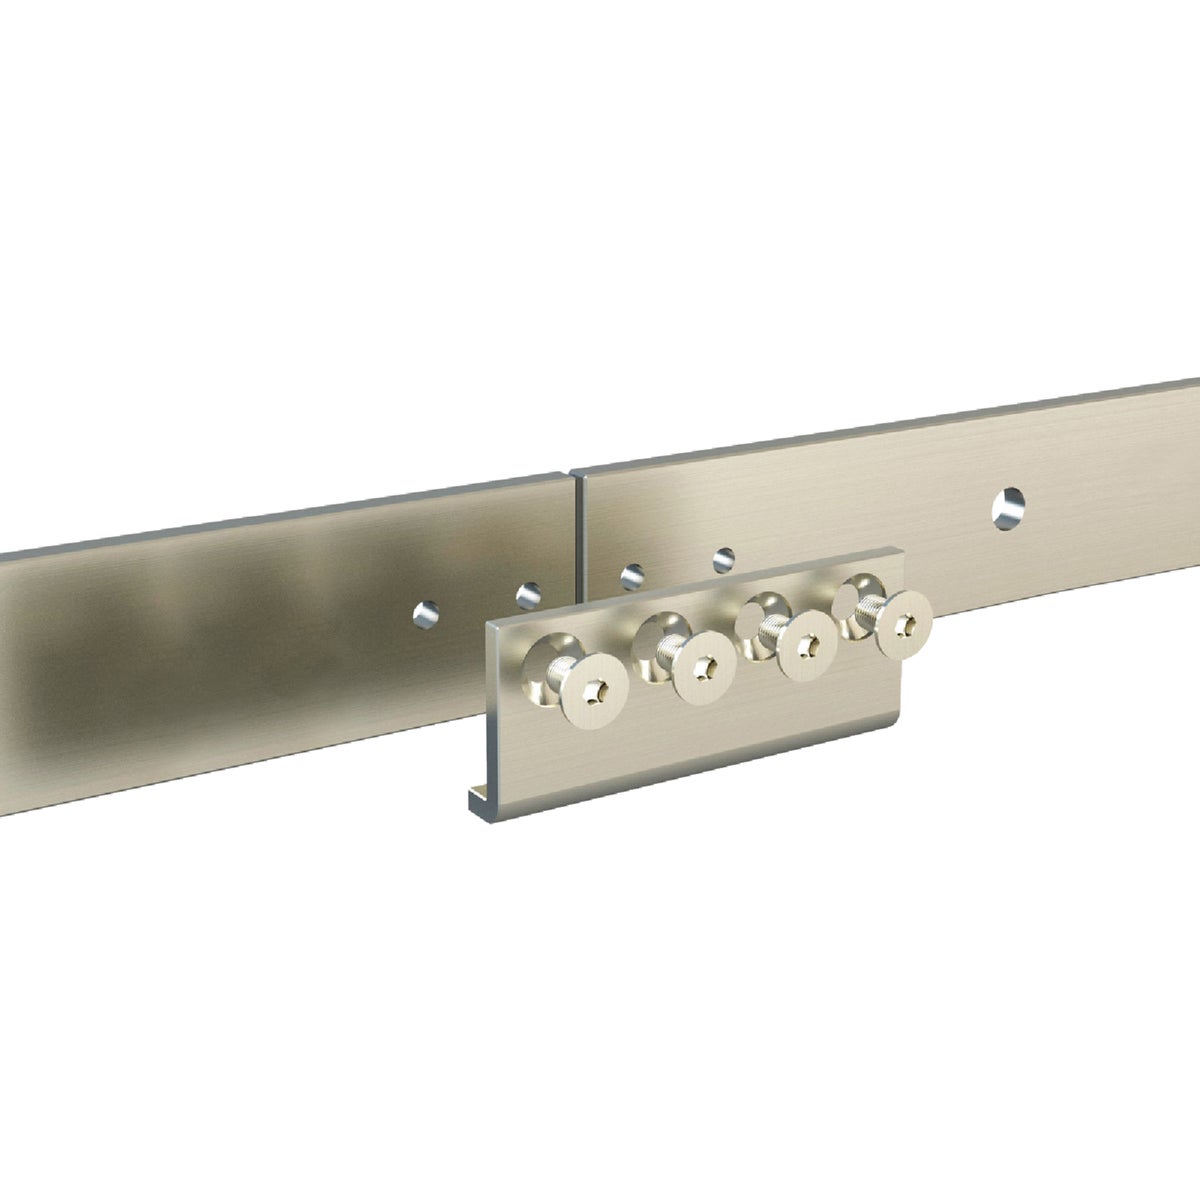 Item 200917, Connects multiple barn door hardware kits - For use on openings wider than 